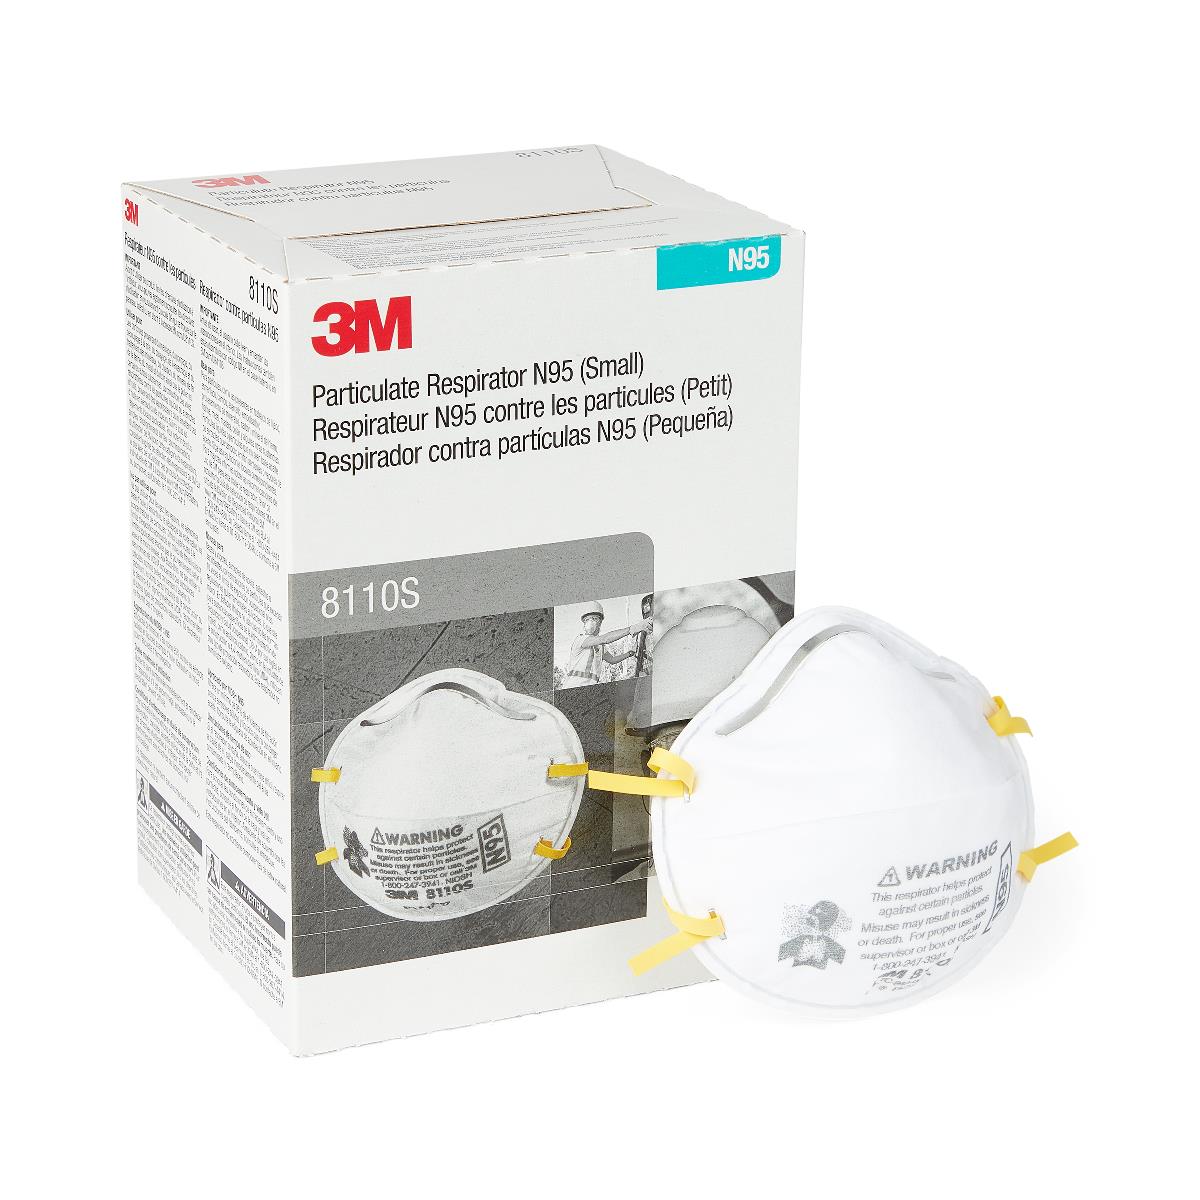 3M N95 Particulate Respirator Model 8110S